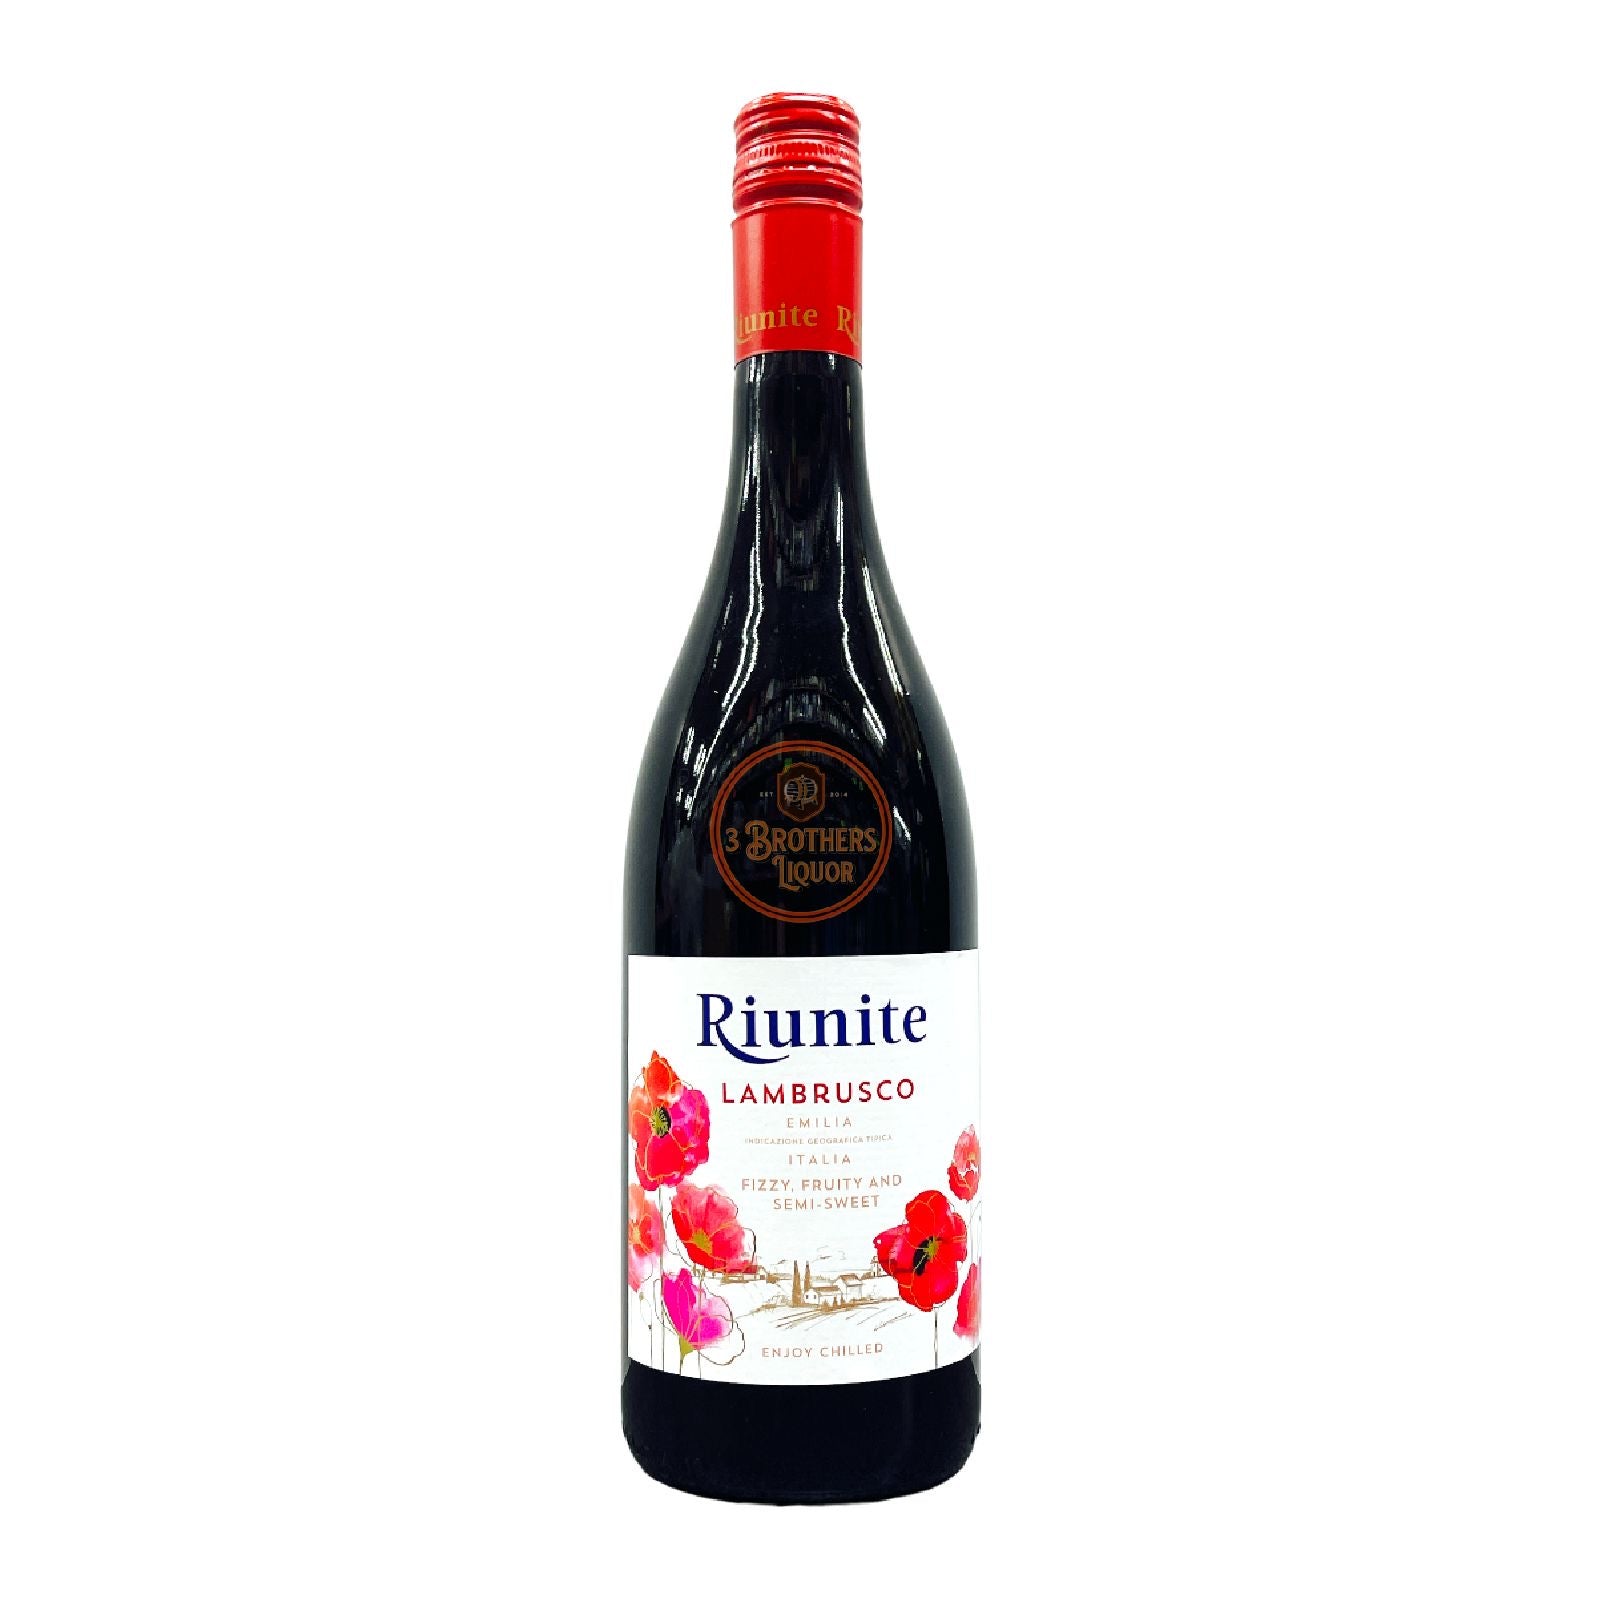 Riunite Lambrusco Fizzy Fruity And Sweet Red Wine 3brothersliquor